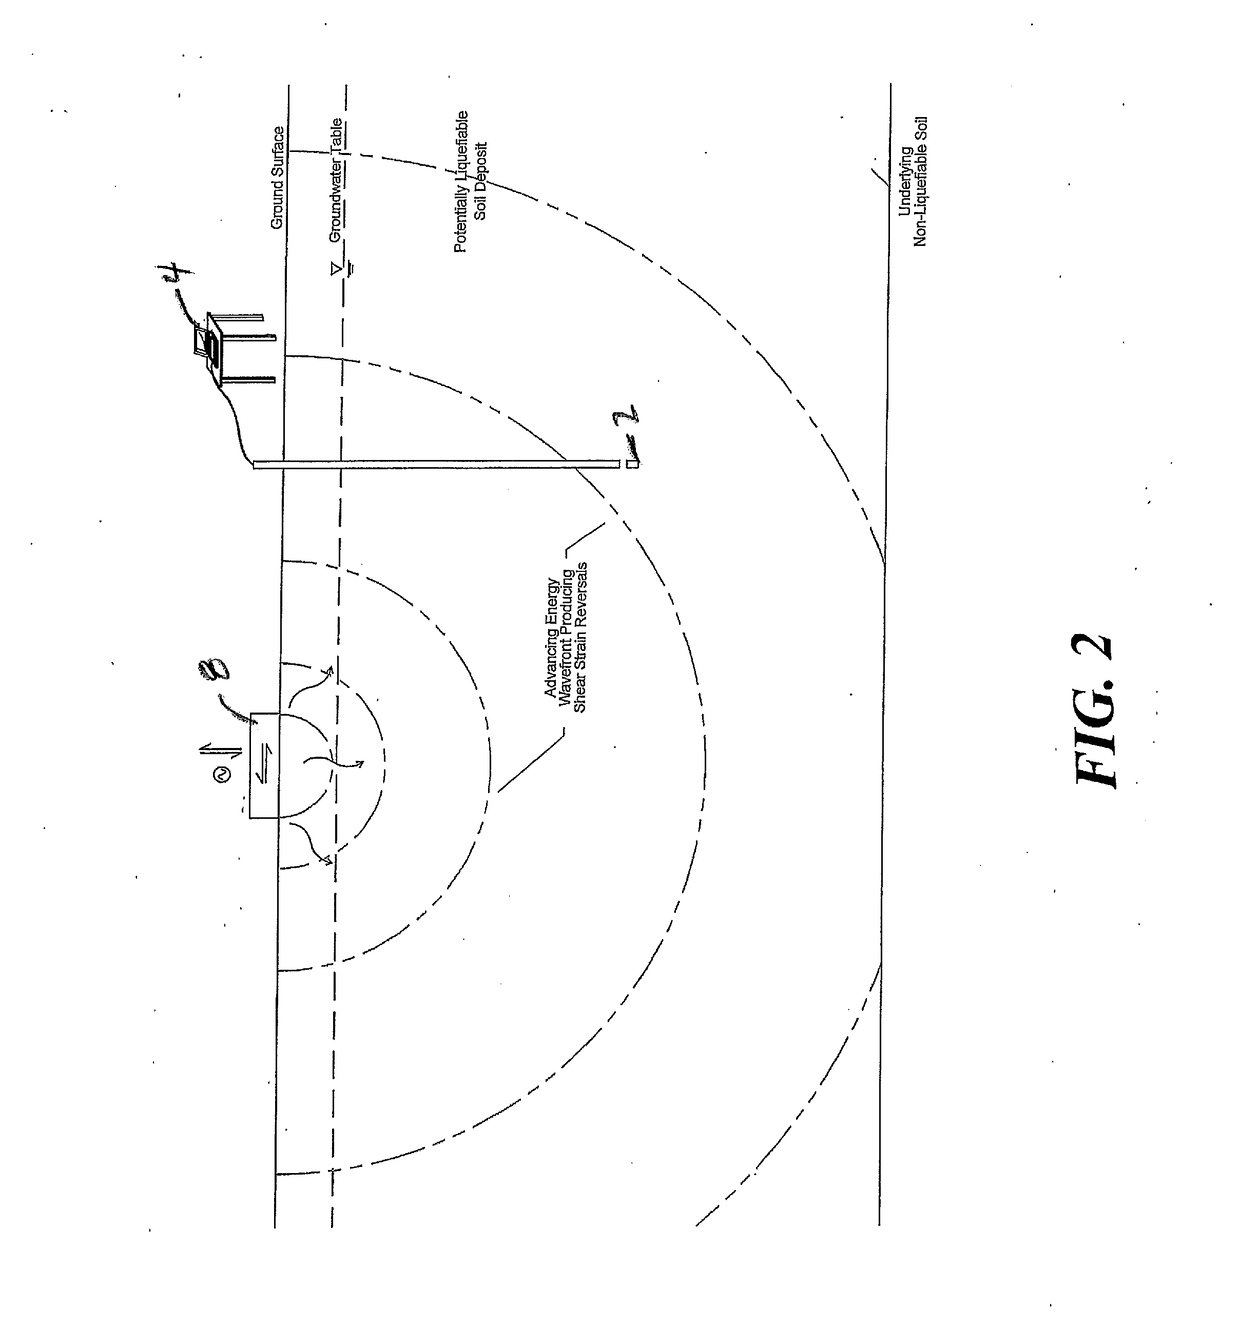 Method of soil liquefaction testing and remediation